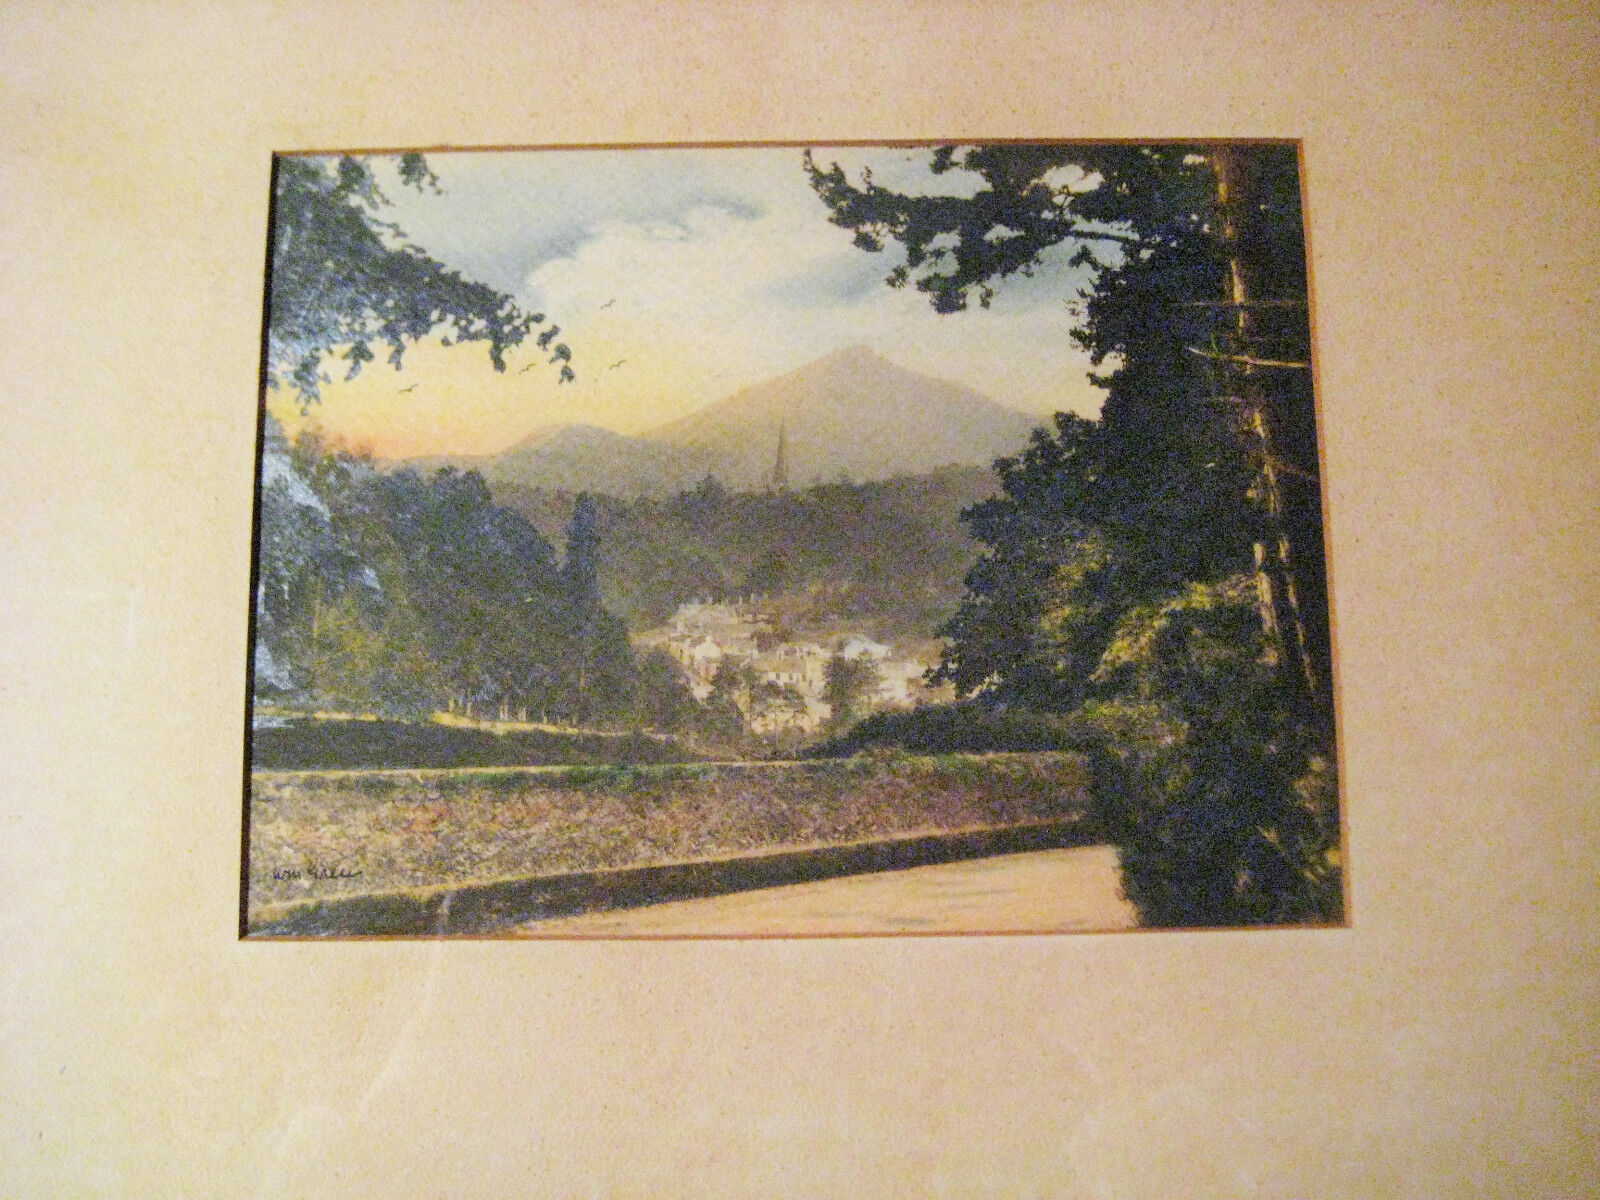  RARE VINTAGE PHOTOGRAPH ENNISKERRY IRELAND SIGNED WILLIAM ALFRED GREEN  c1930 